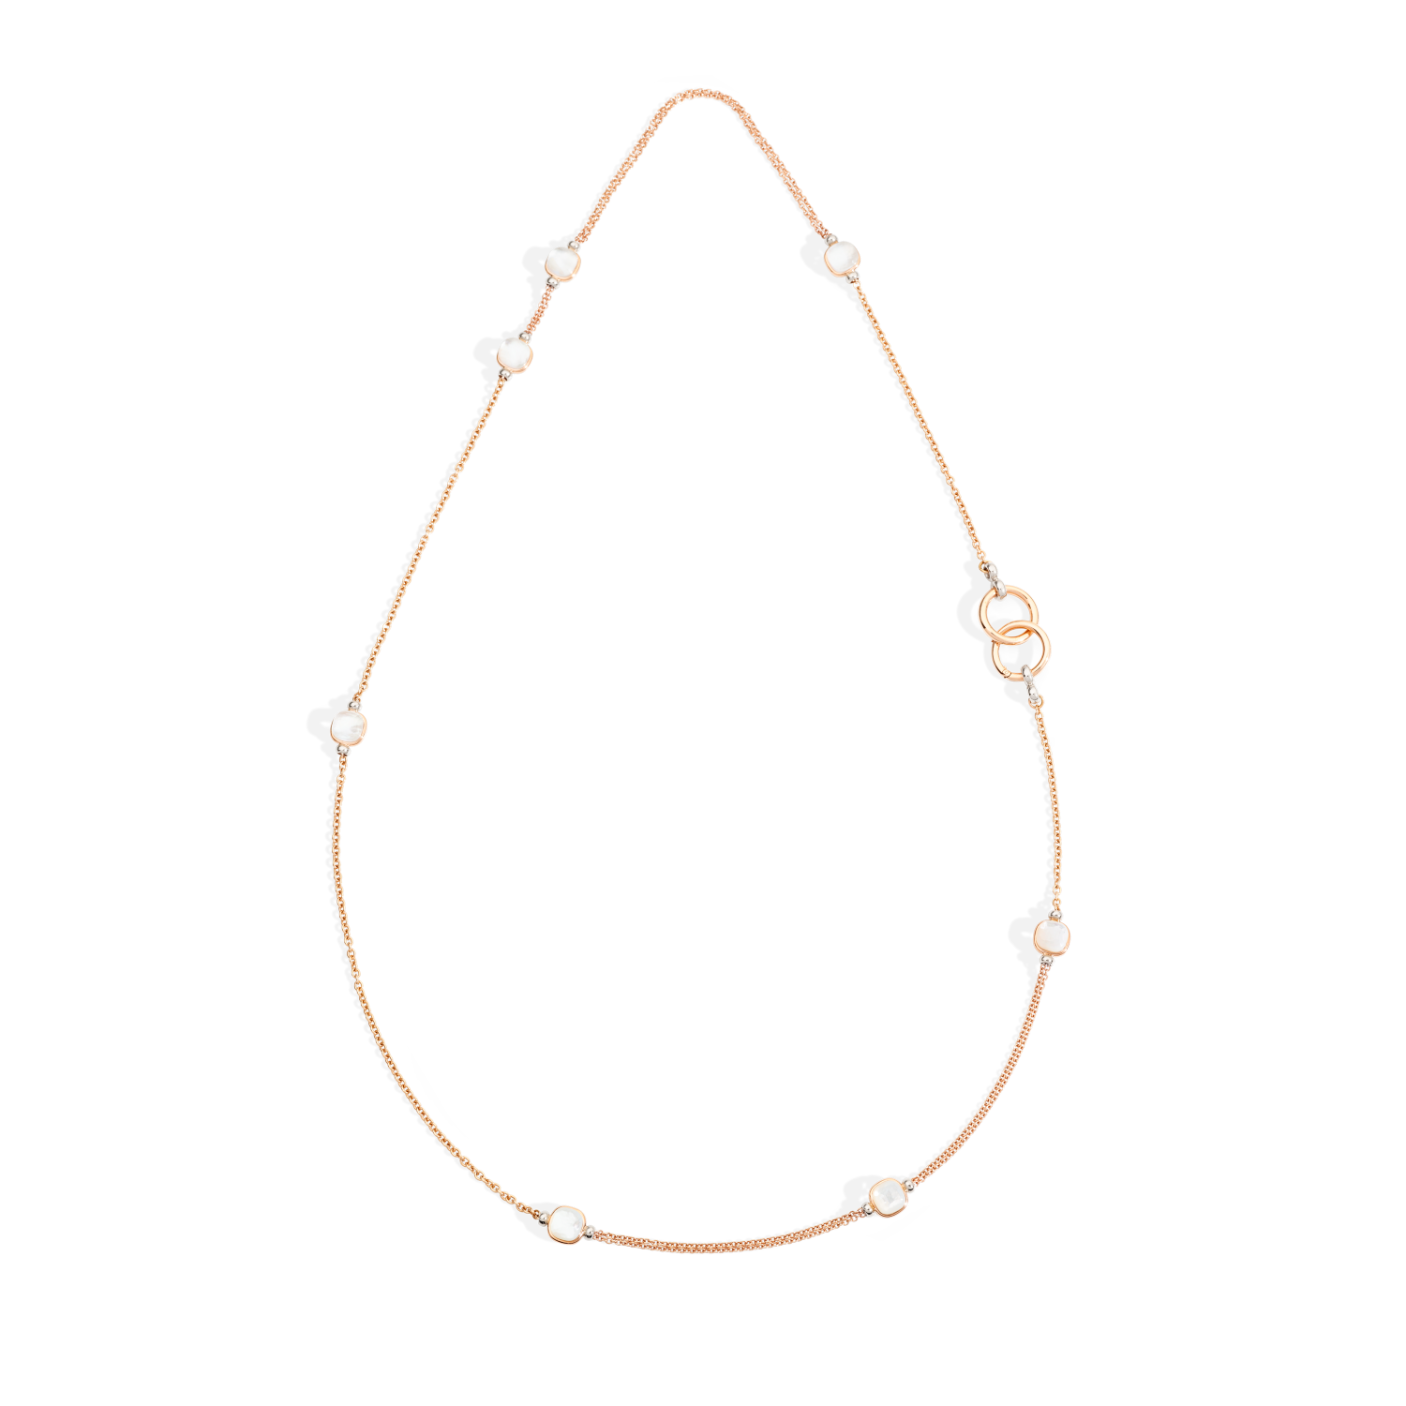 PCB9052_O6000_000TB_010_Pomellato_necklace-nudo-white-gold-18kt-rose-gold-18kt-mother-of-pearl-white-topaz.png